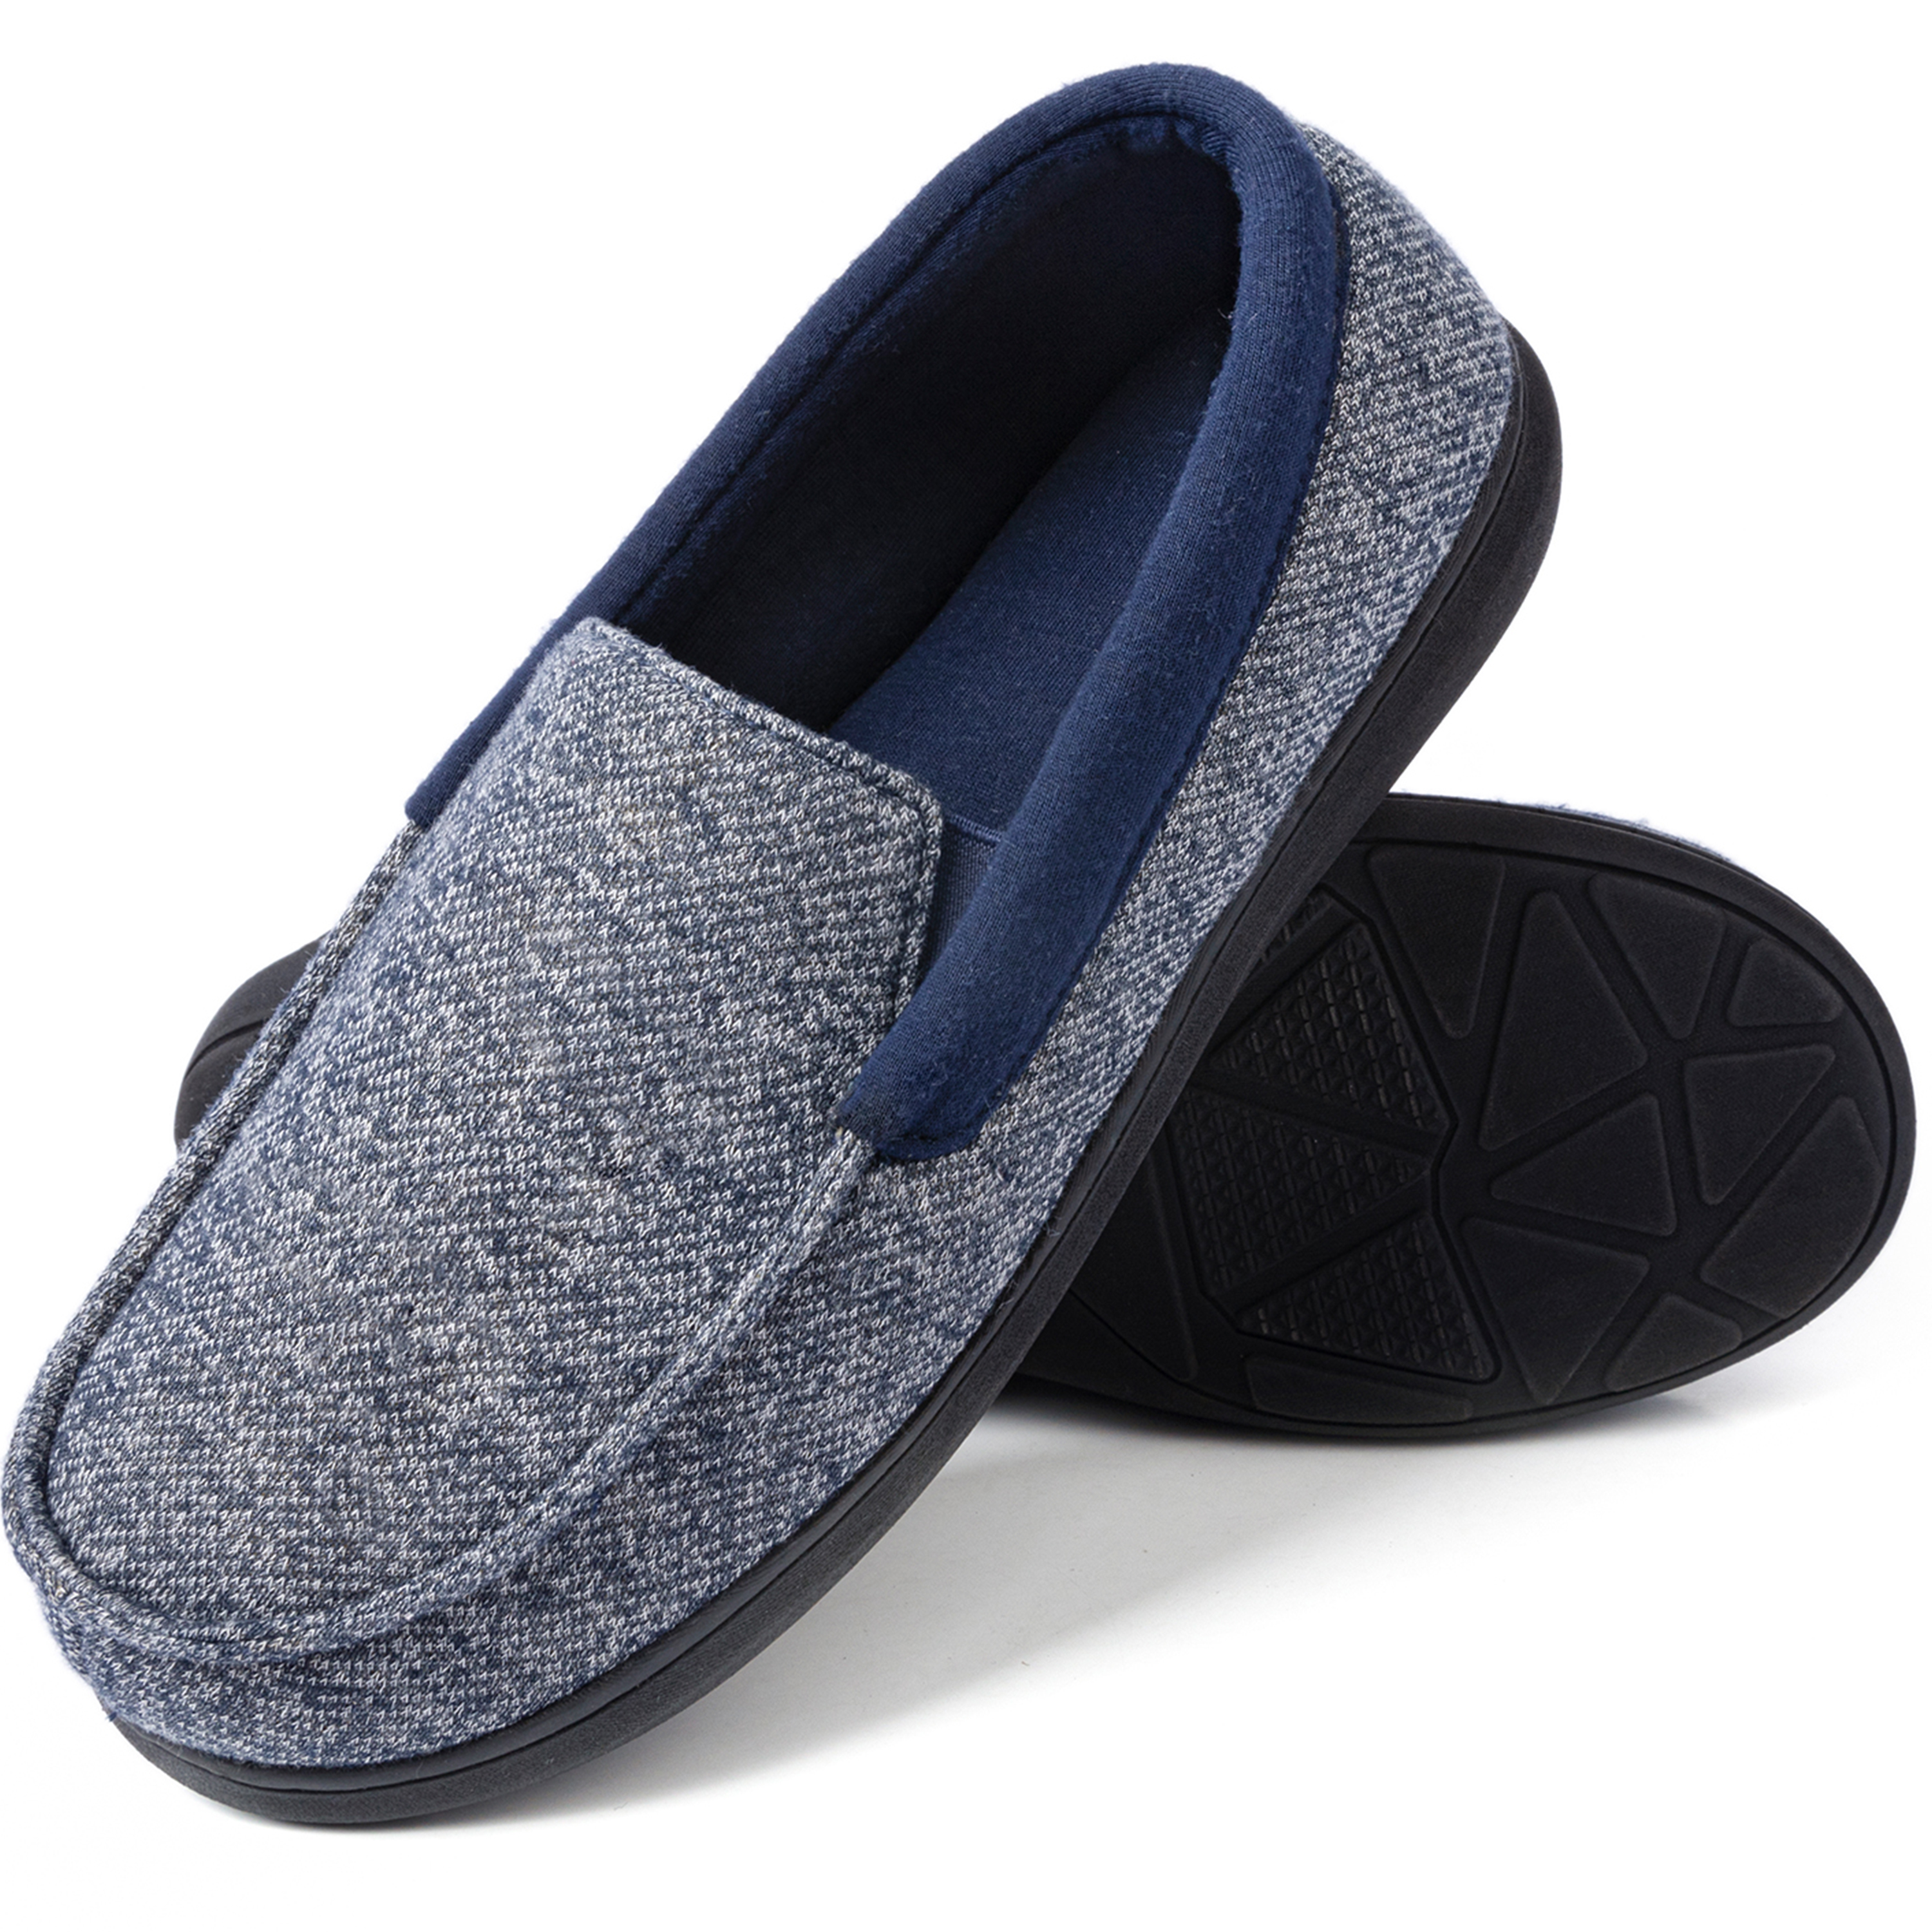 Rock Dove Slippers A Guide to Comfort and Style